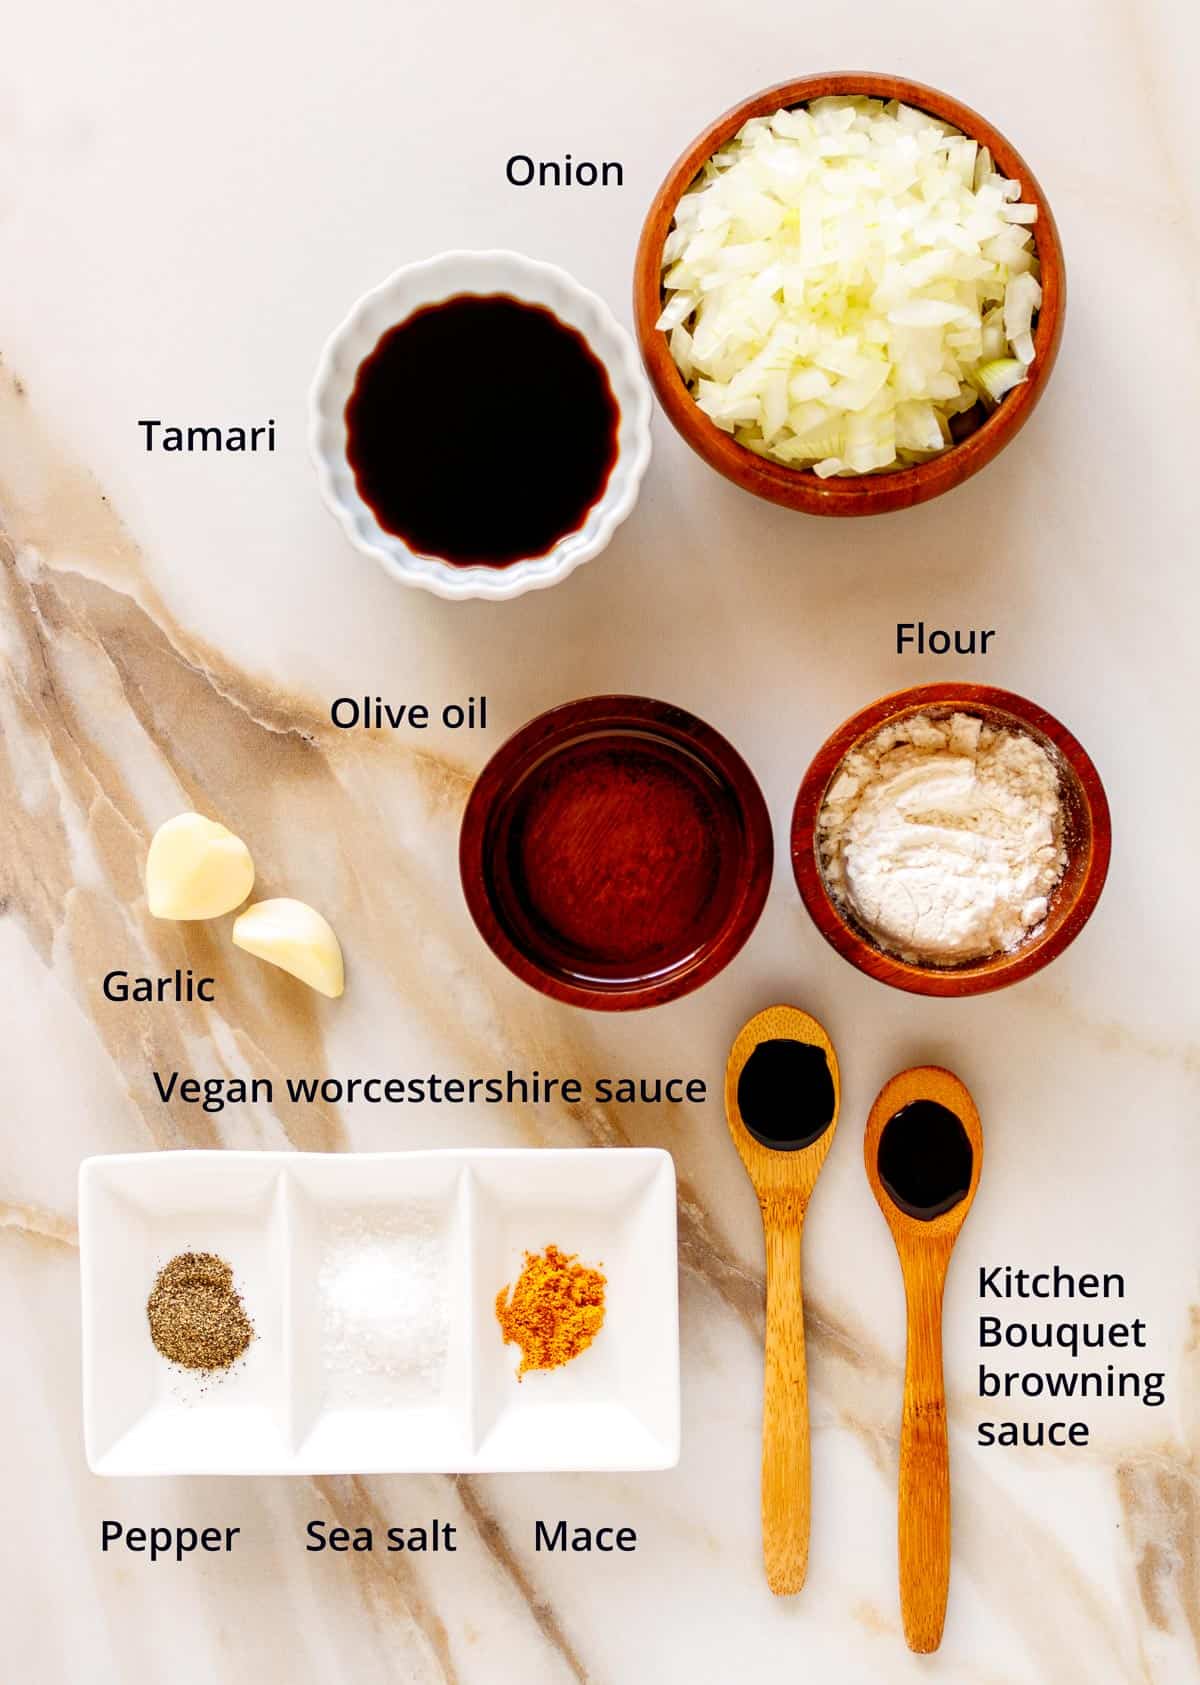 Plant-based seasonings make a rich gravy for brown stew without meat.